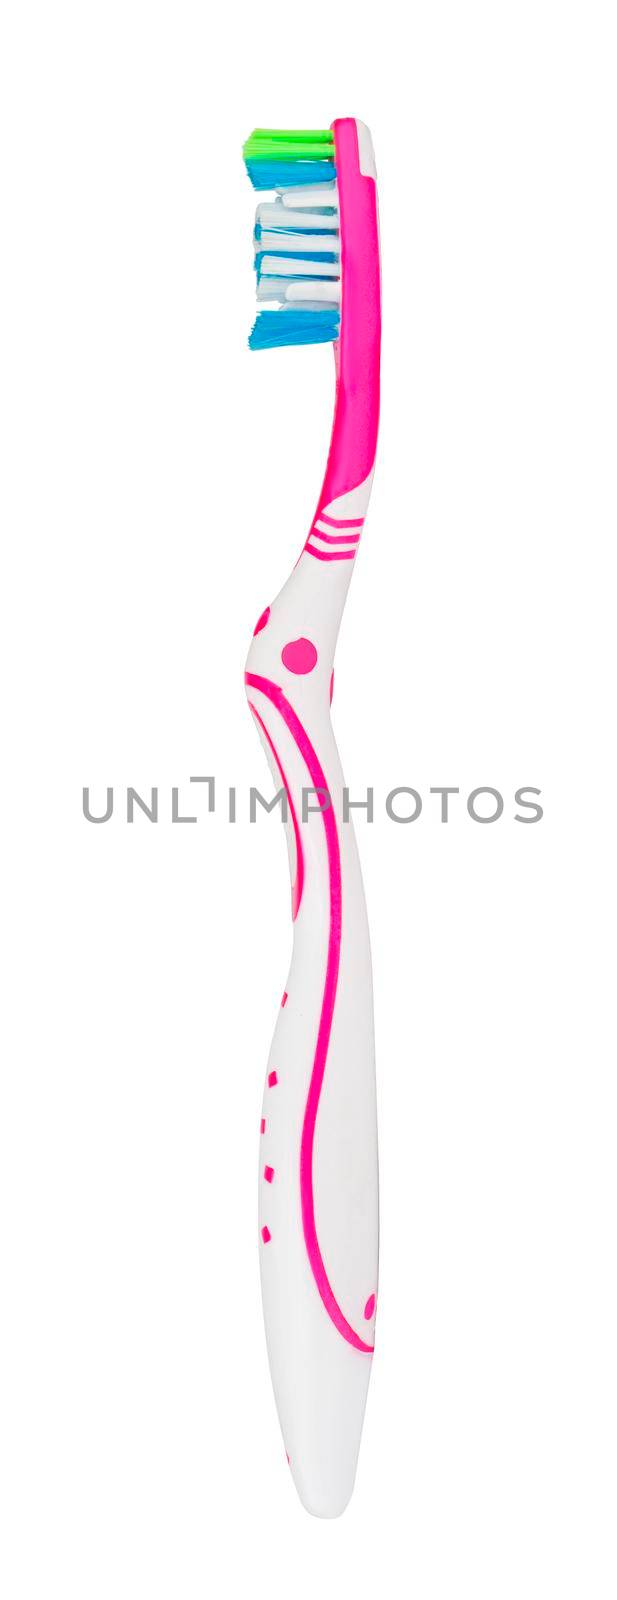 toothbrush, a tool for brushing teeth, on a white background in isolation